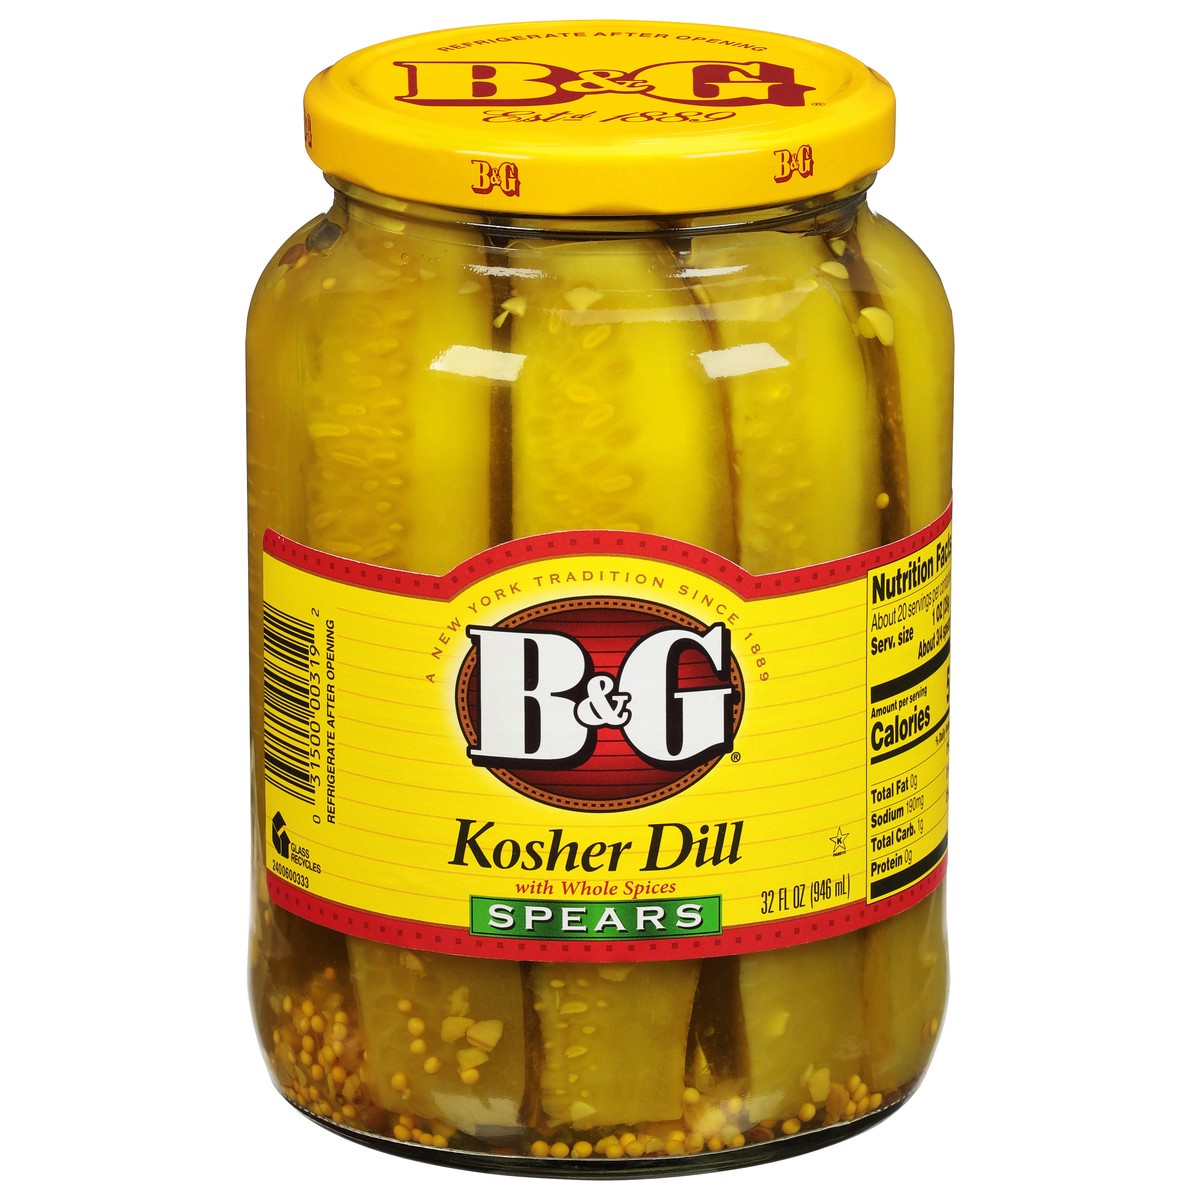 slide 10 of 10, B&G Spears Kosher Dill Pickles with Whole Spices 32 fl oz, 32 fl oz